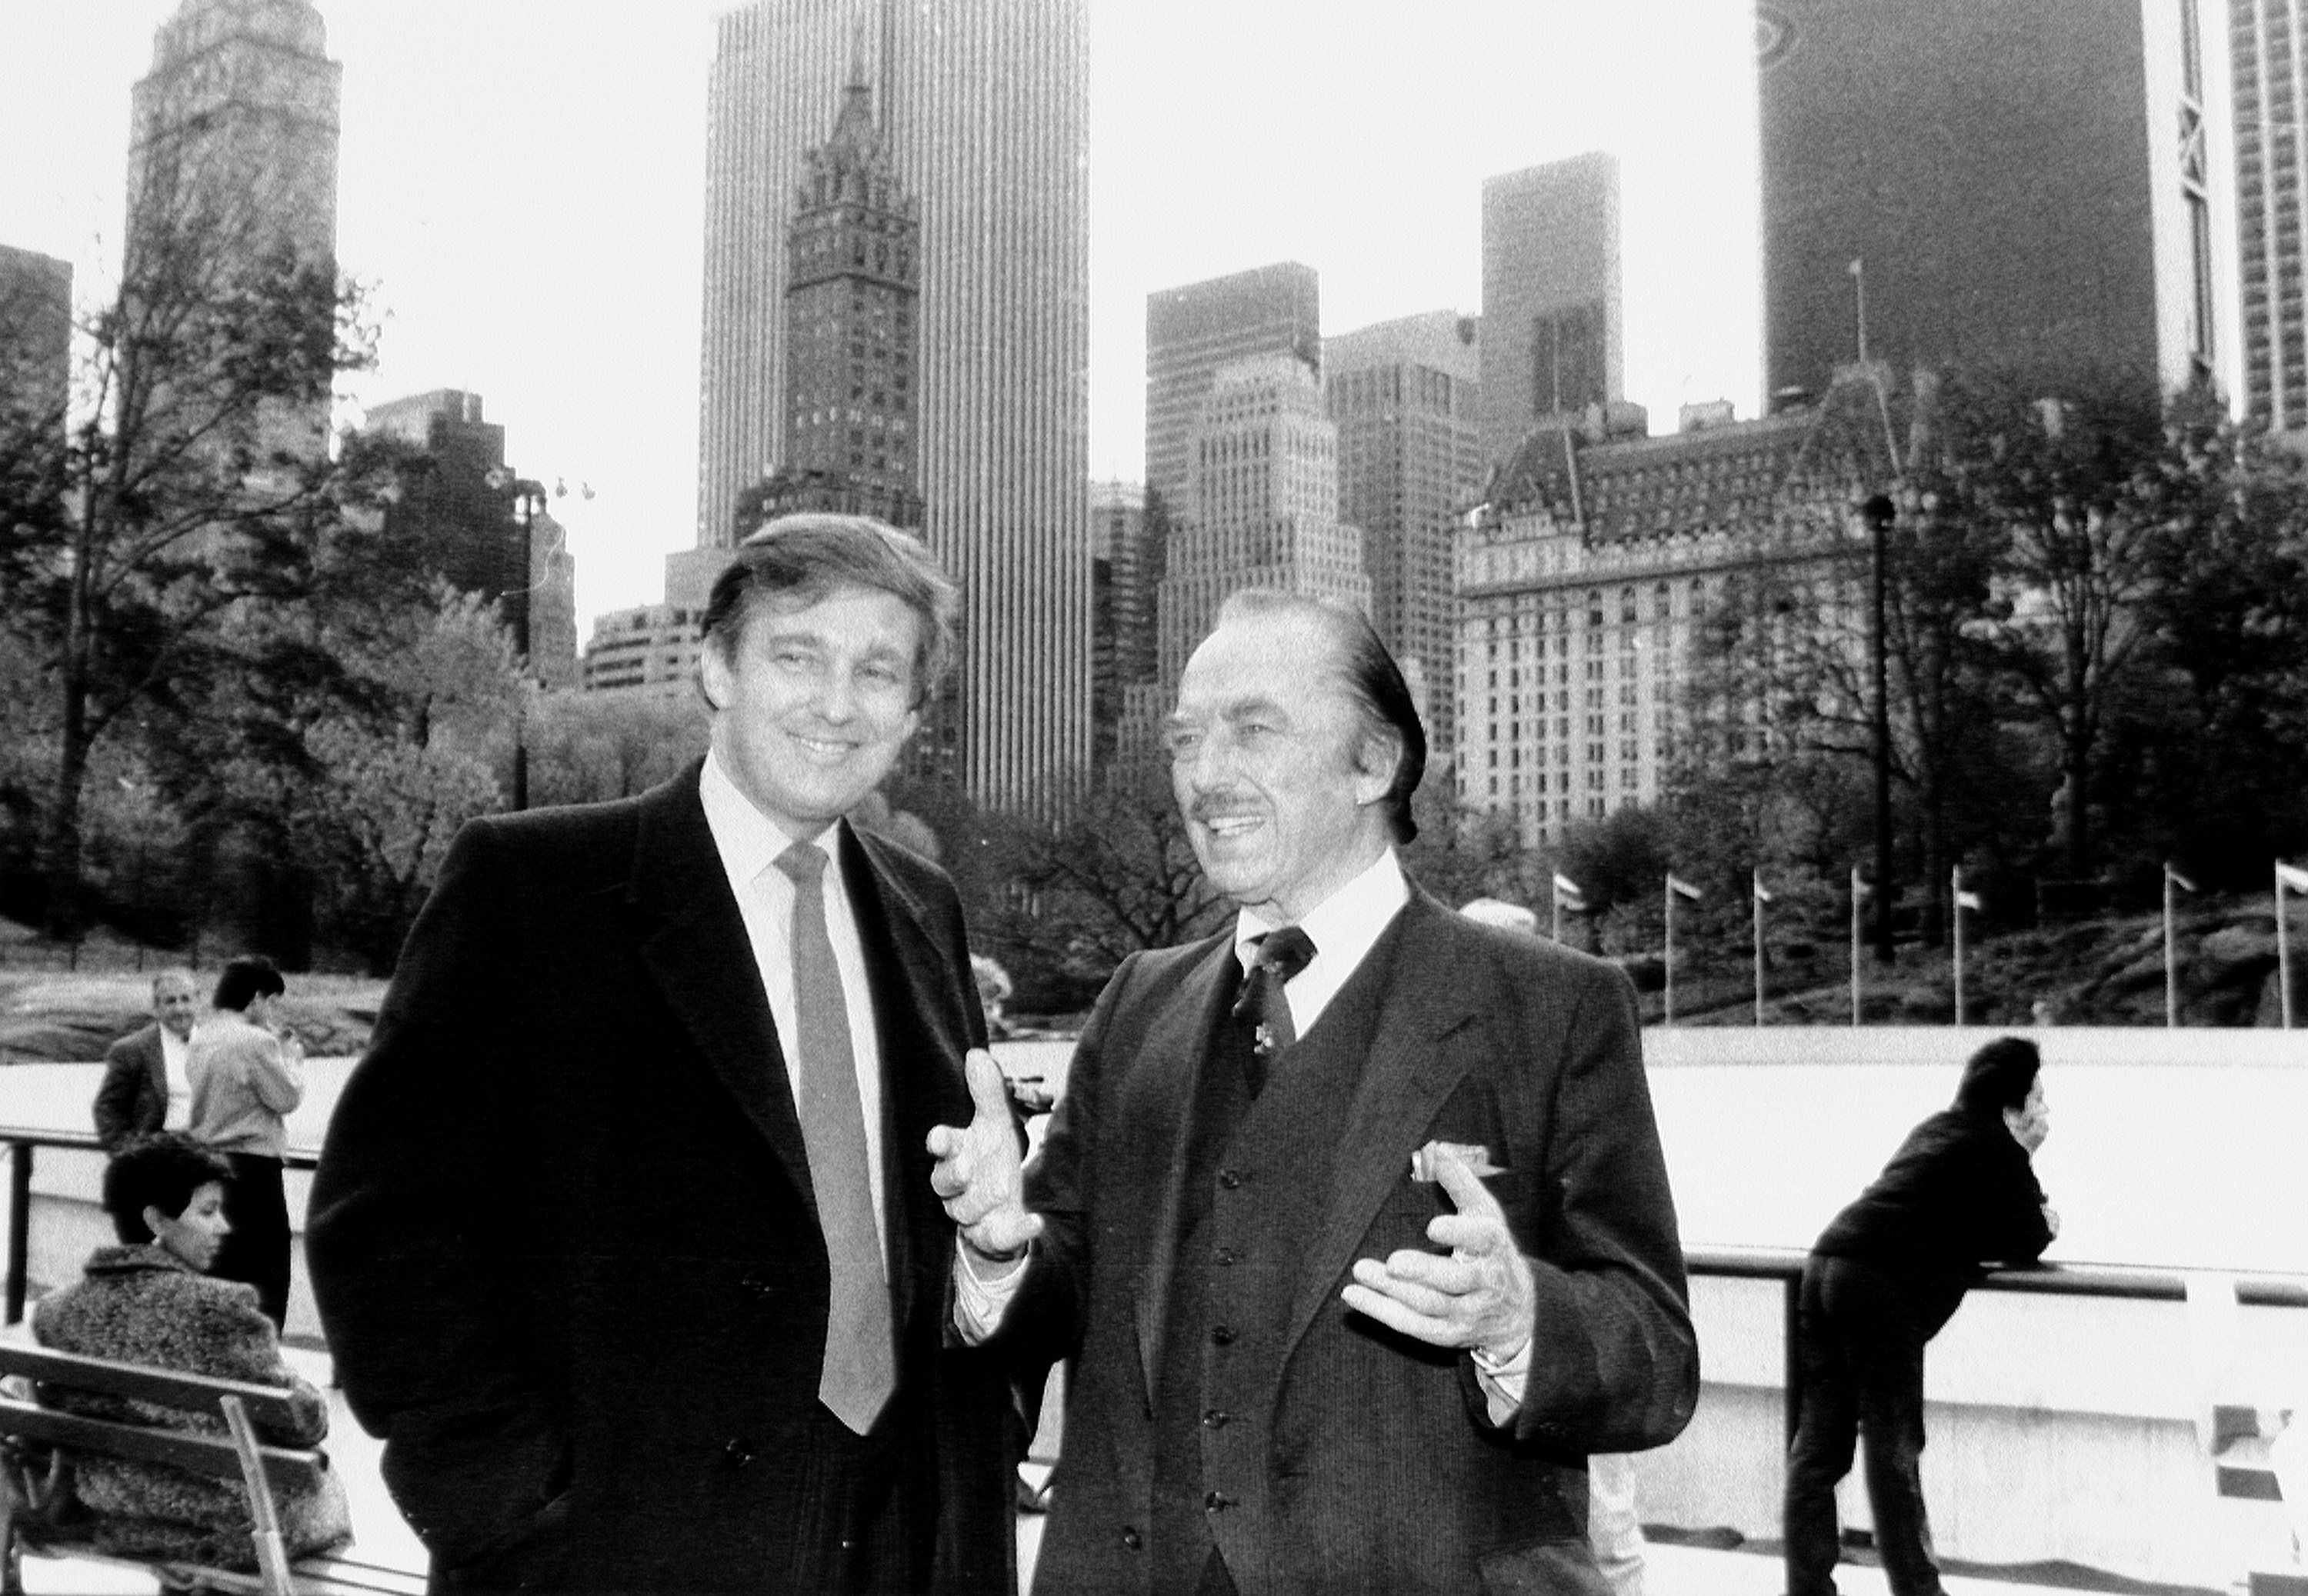 UNITED STATES - NOVEMBER 06:  Donald Trump and father Fred Trump at opening of Wollman Rink.  (Photo by Dennis Caruso/NY Daily News Archive via Getty Images)